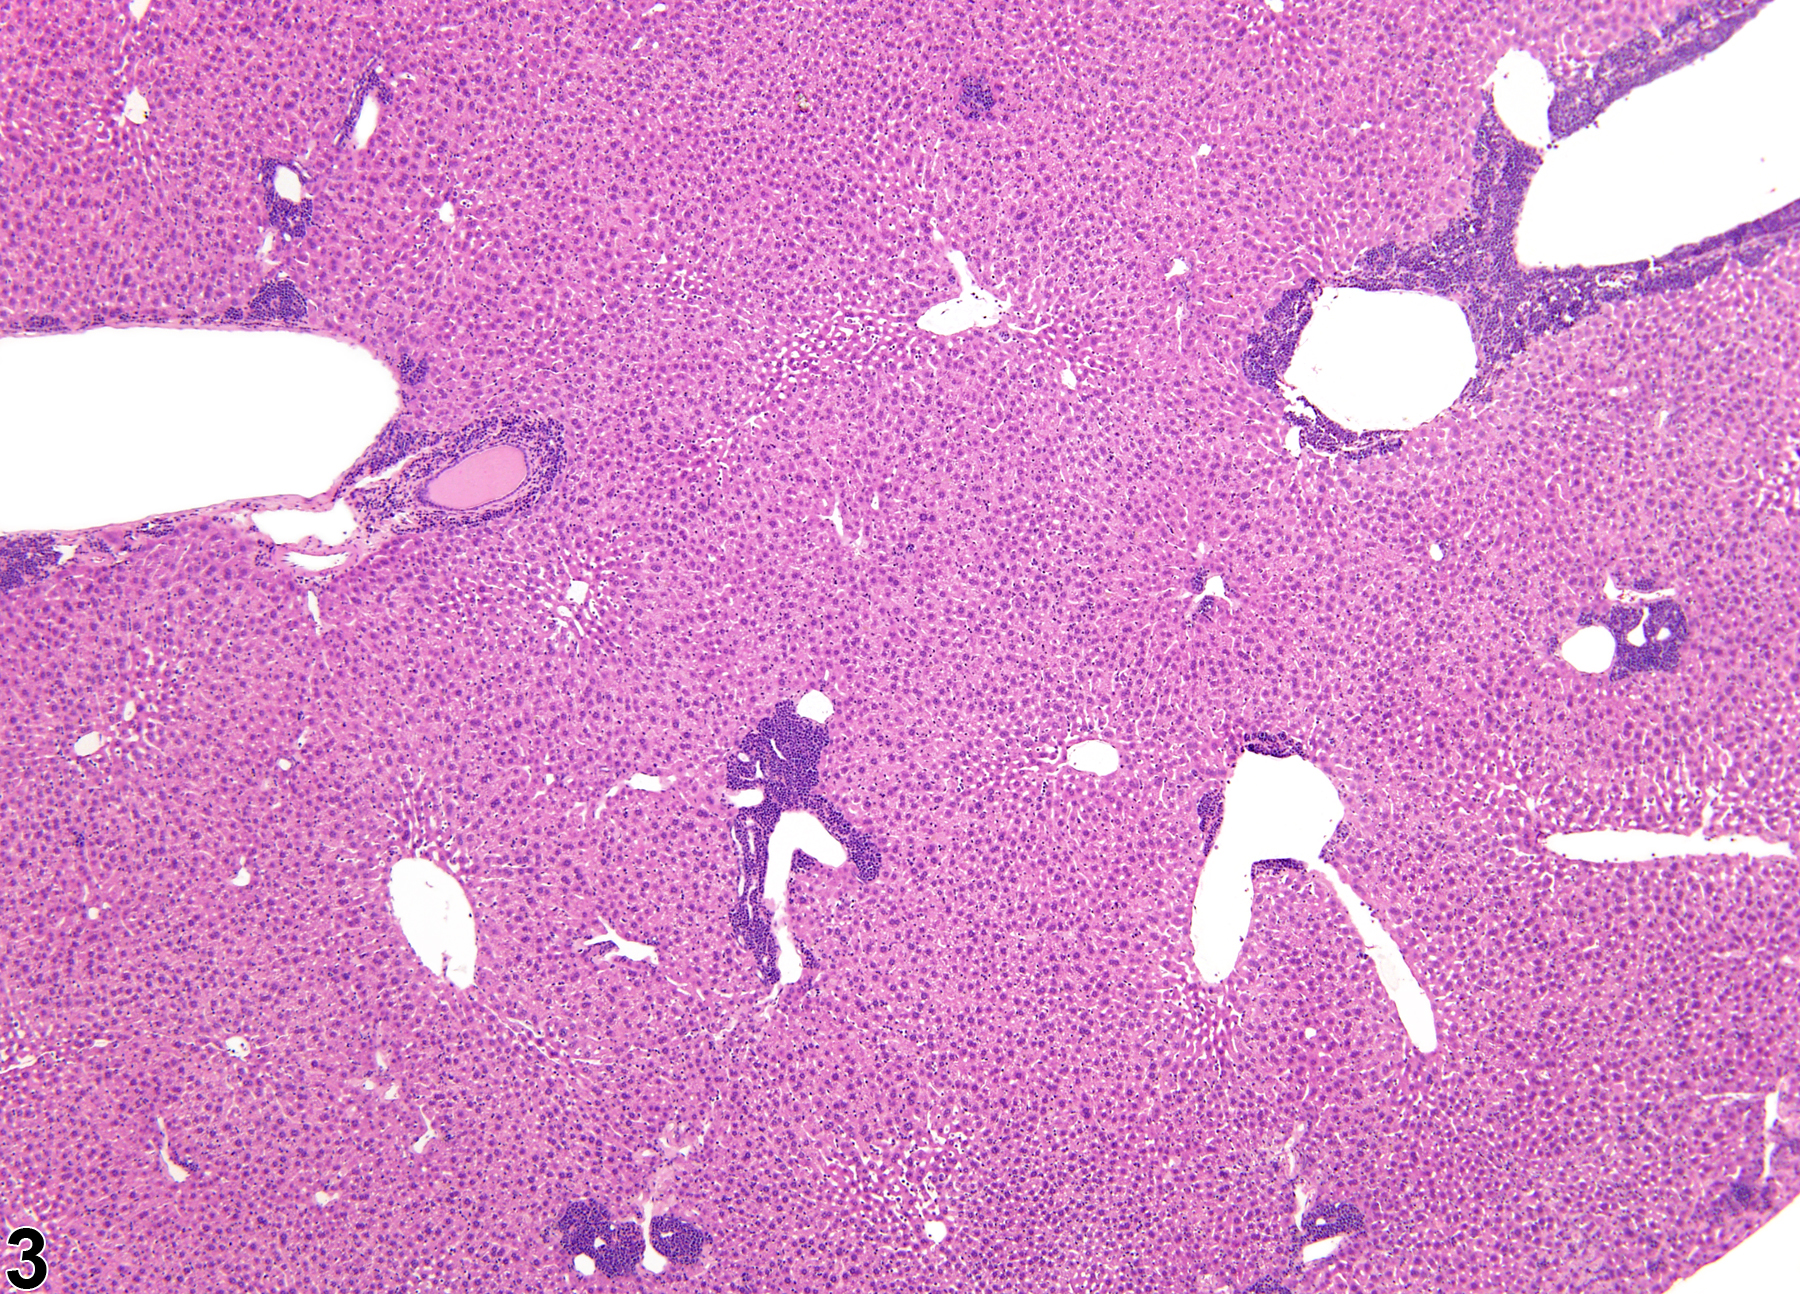 Image of extramedullary hematopoiesis in the liver from a male  B6C3F1 mouse in a chronic study